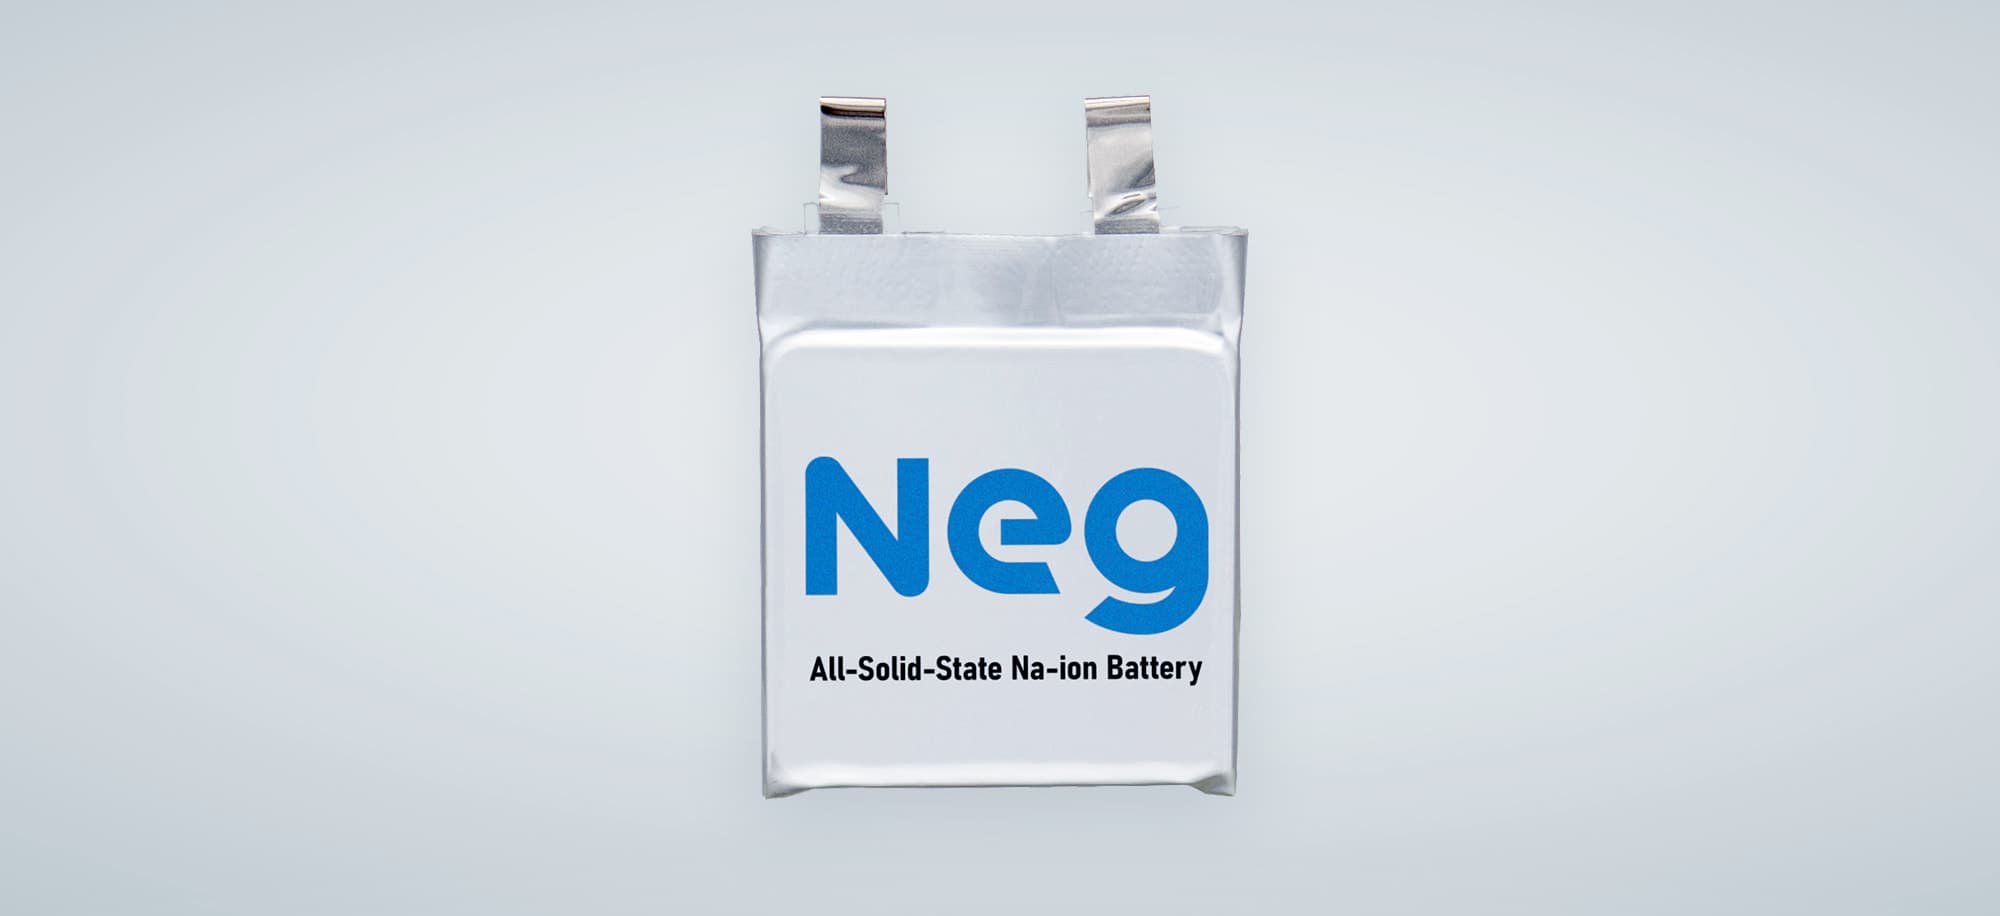 Neg All-Solid-State Na-ion Battery